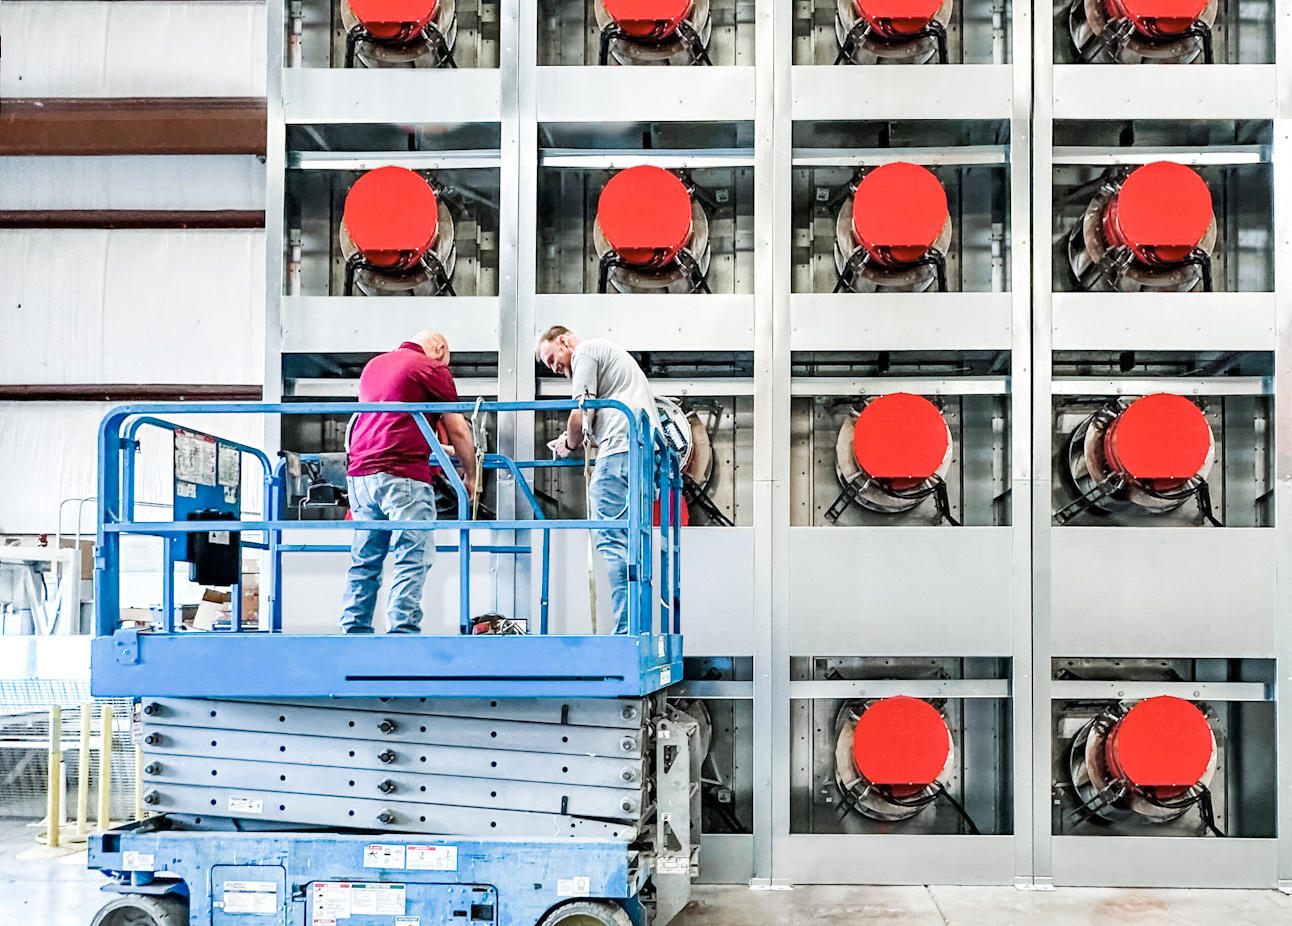 Some workers stand on a hydraulic lift in front of a data center.